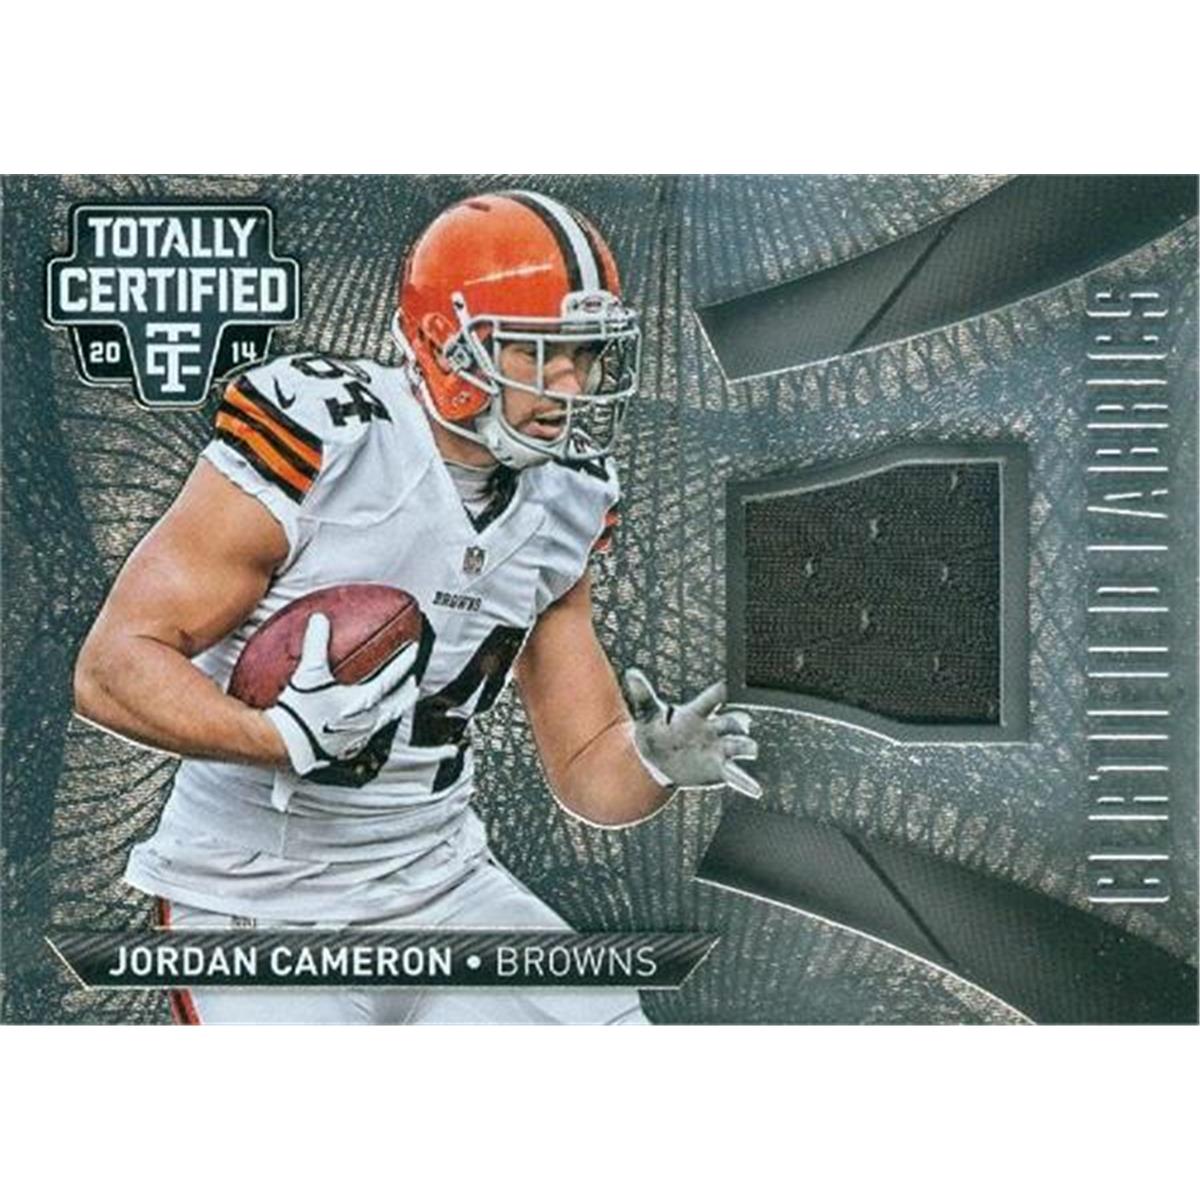 Picture of Autograph Warehouse 409186 Jordan Cameron Player Worn Jersey Patch Football Card - 2014 Panini Totally Certified CFJC